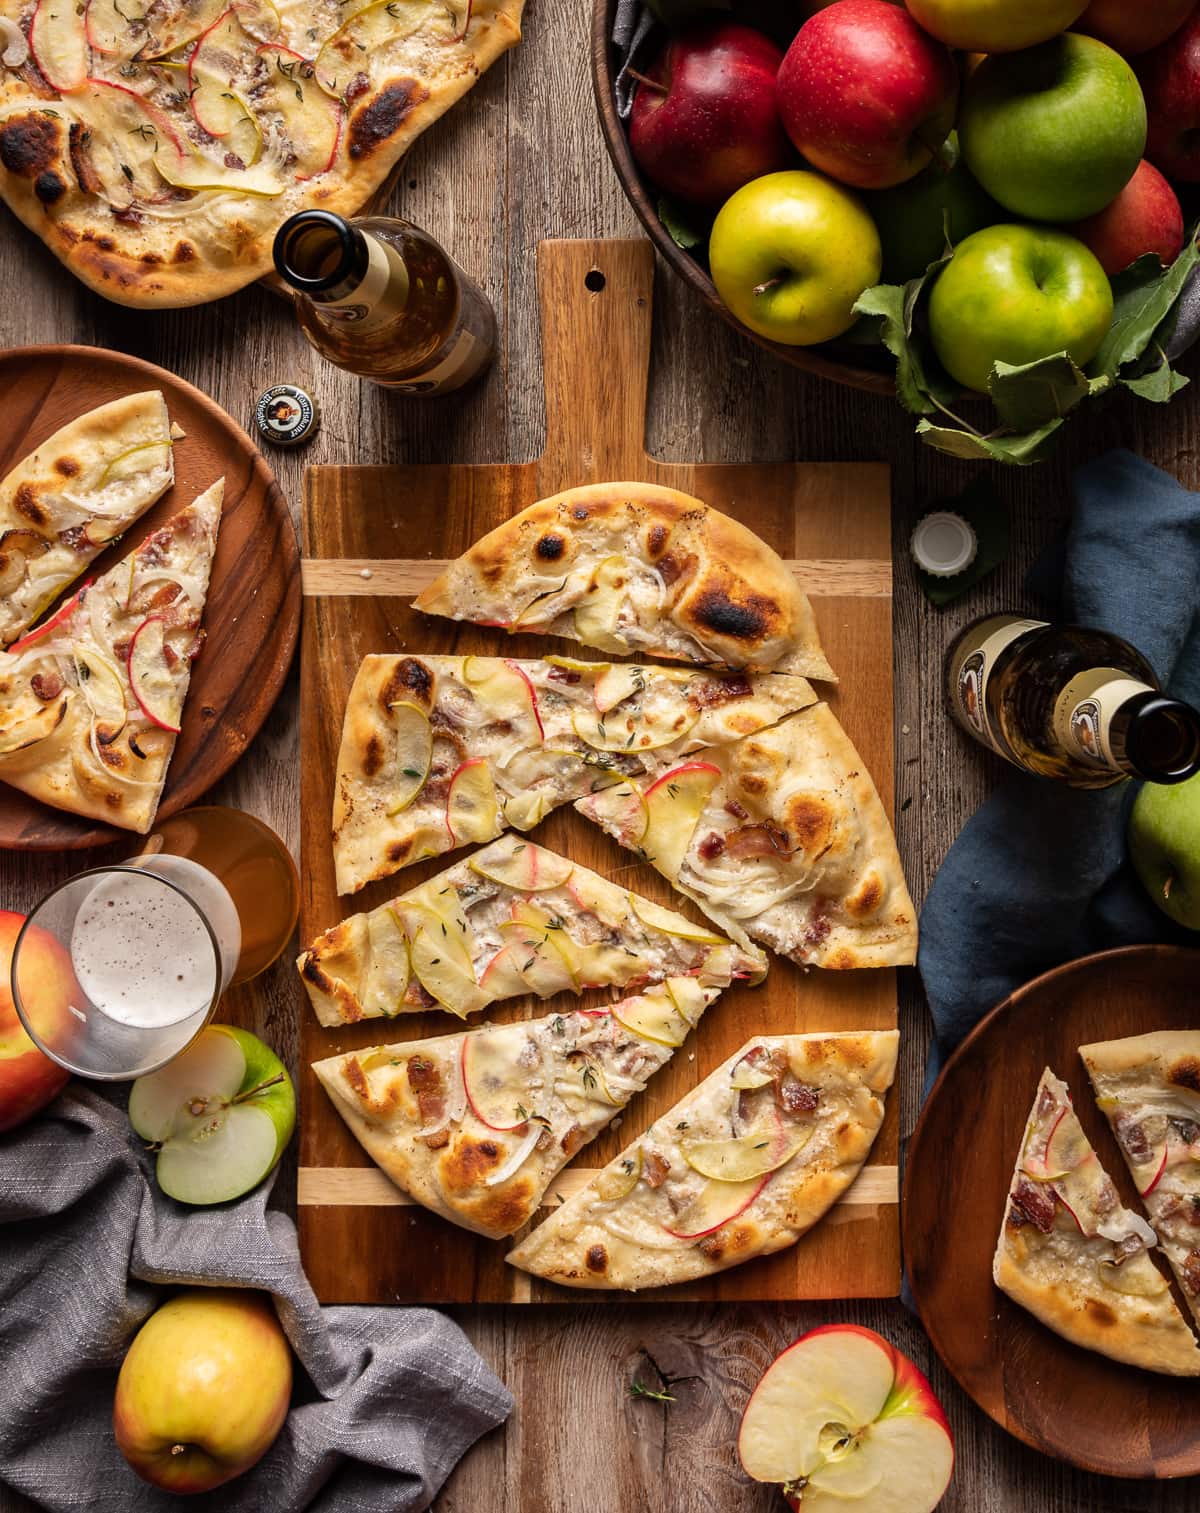 flammkuchen flatbread with apples onion and bacon cut into slices on on a cutting board with whole apples and bottles of german beer